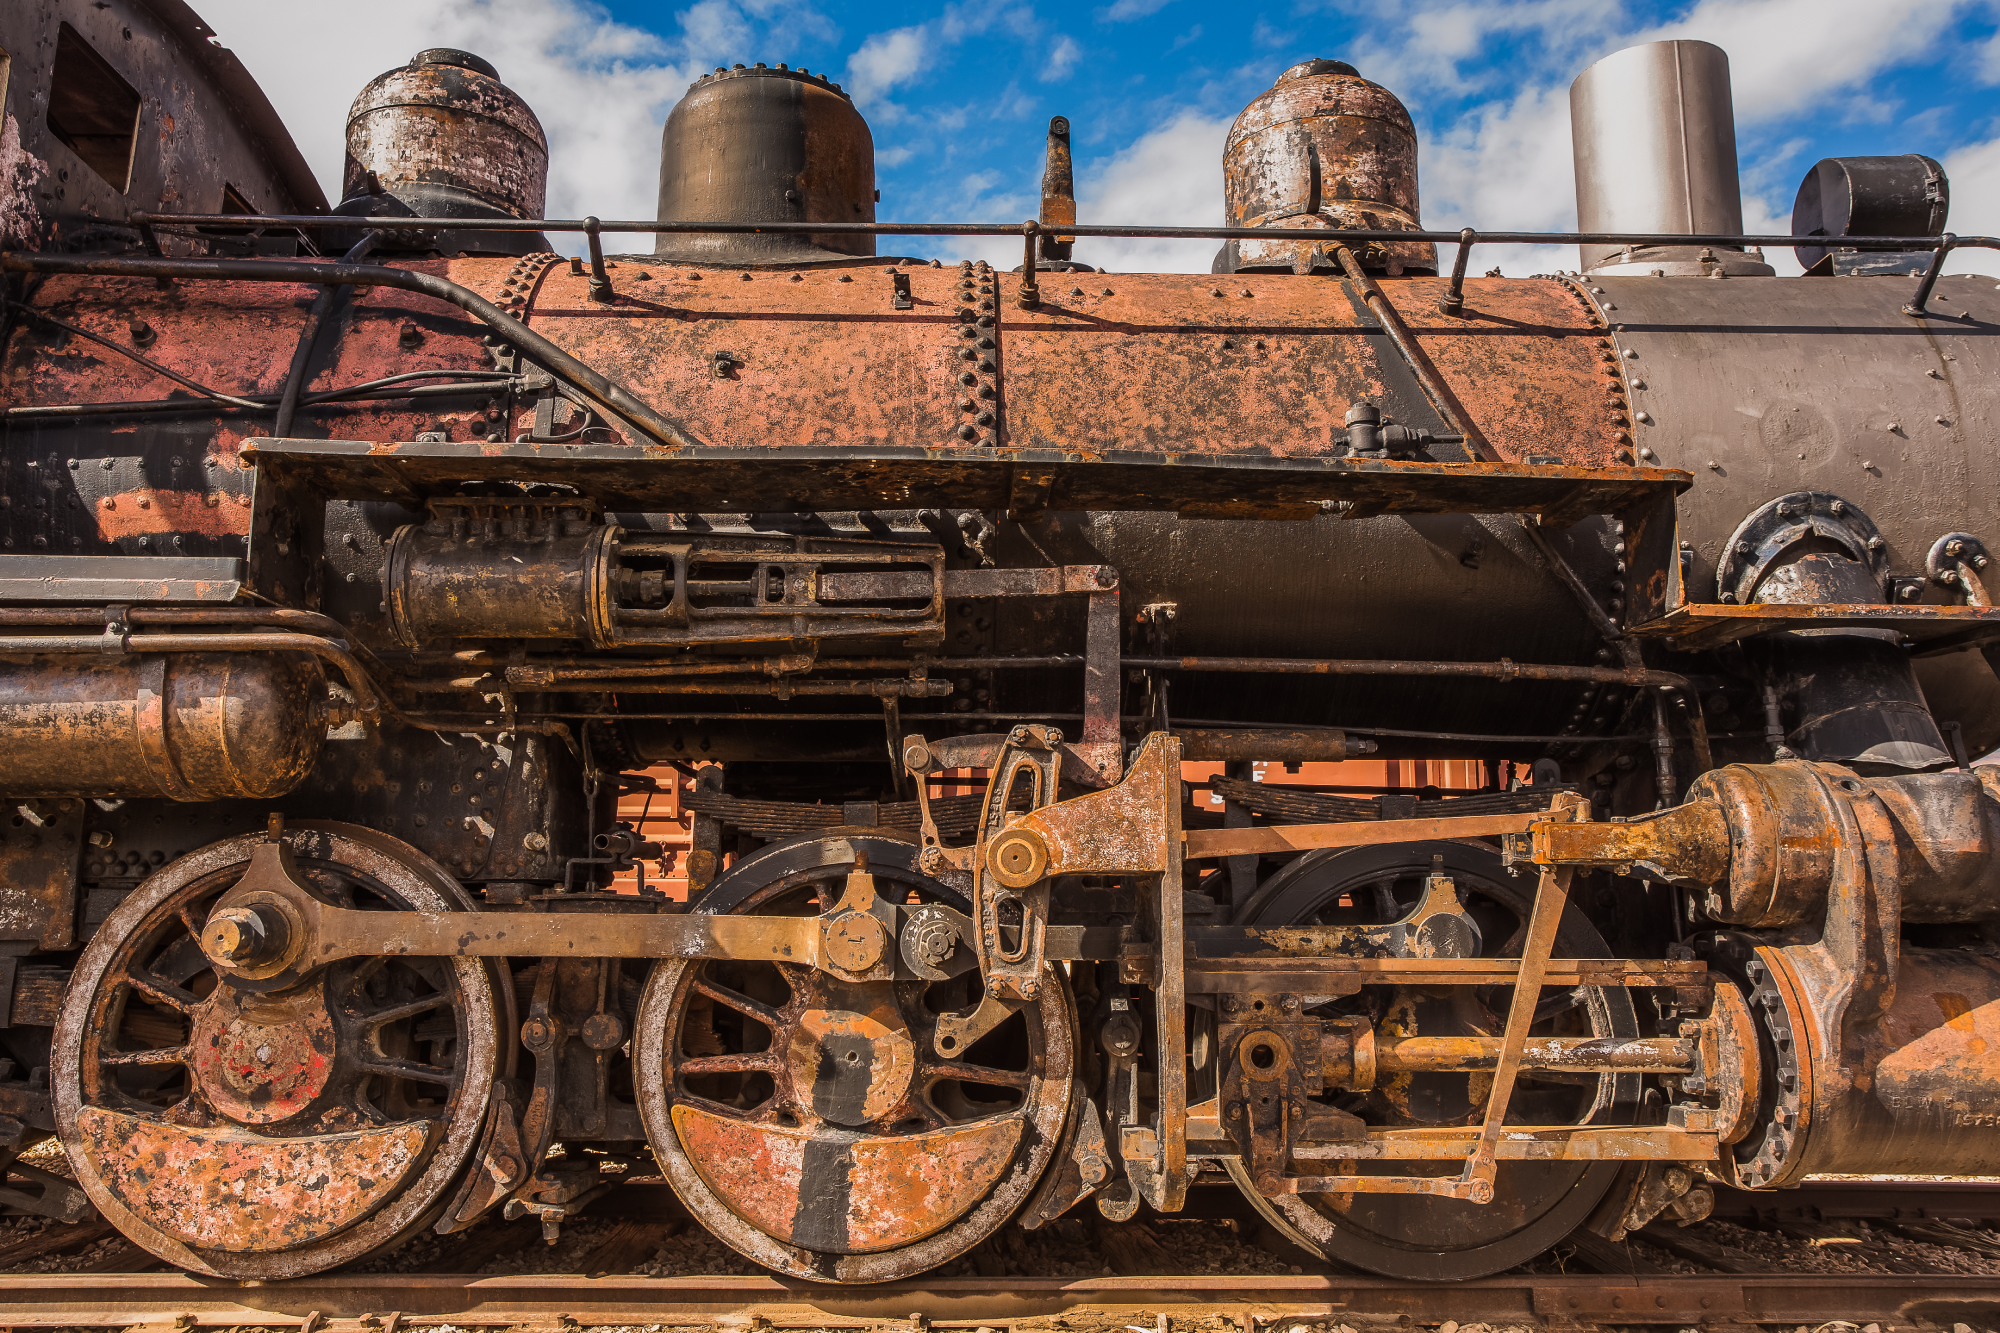 HDR Photography Workshop: Heber Creeper Train HDR | Pt.6 | Final Image Processing